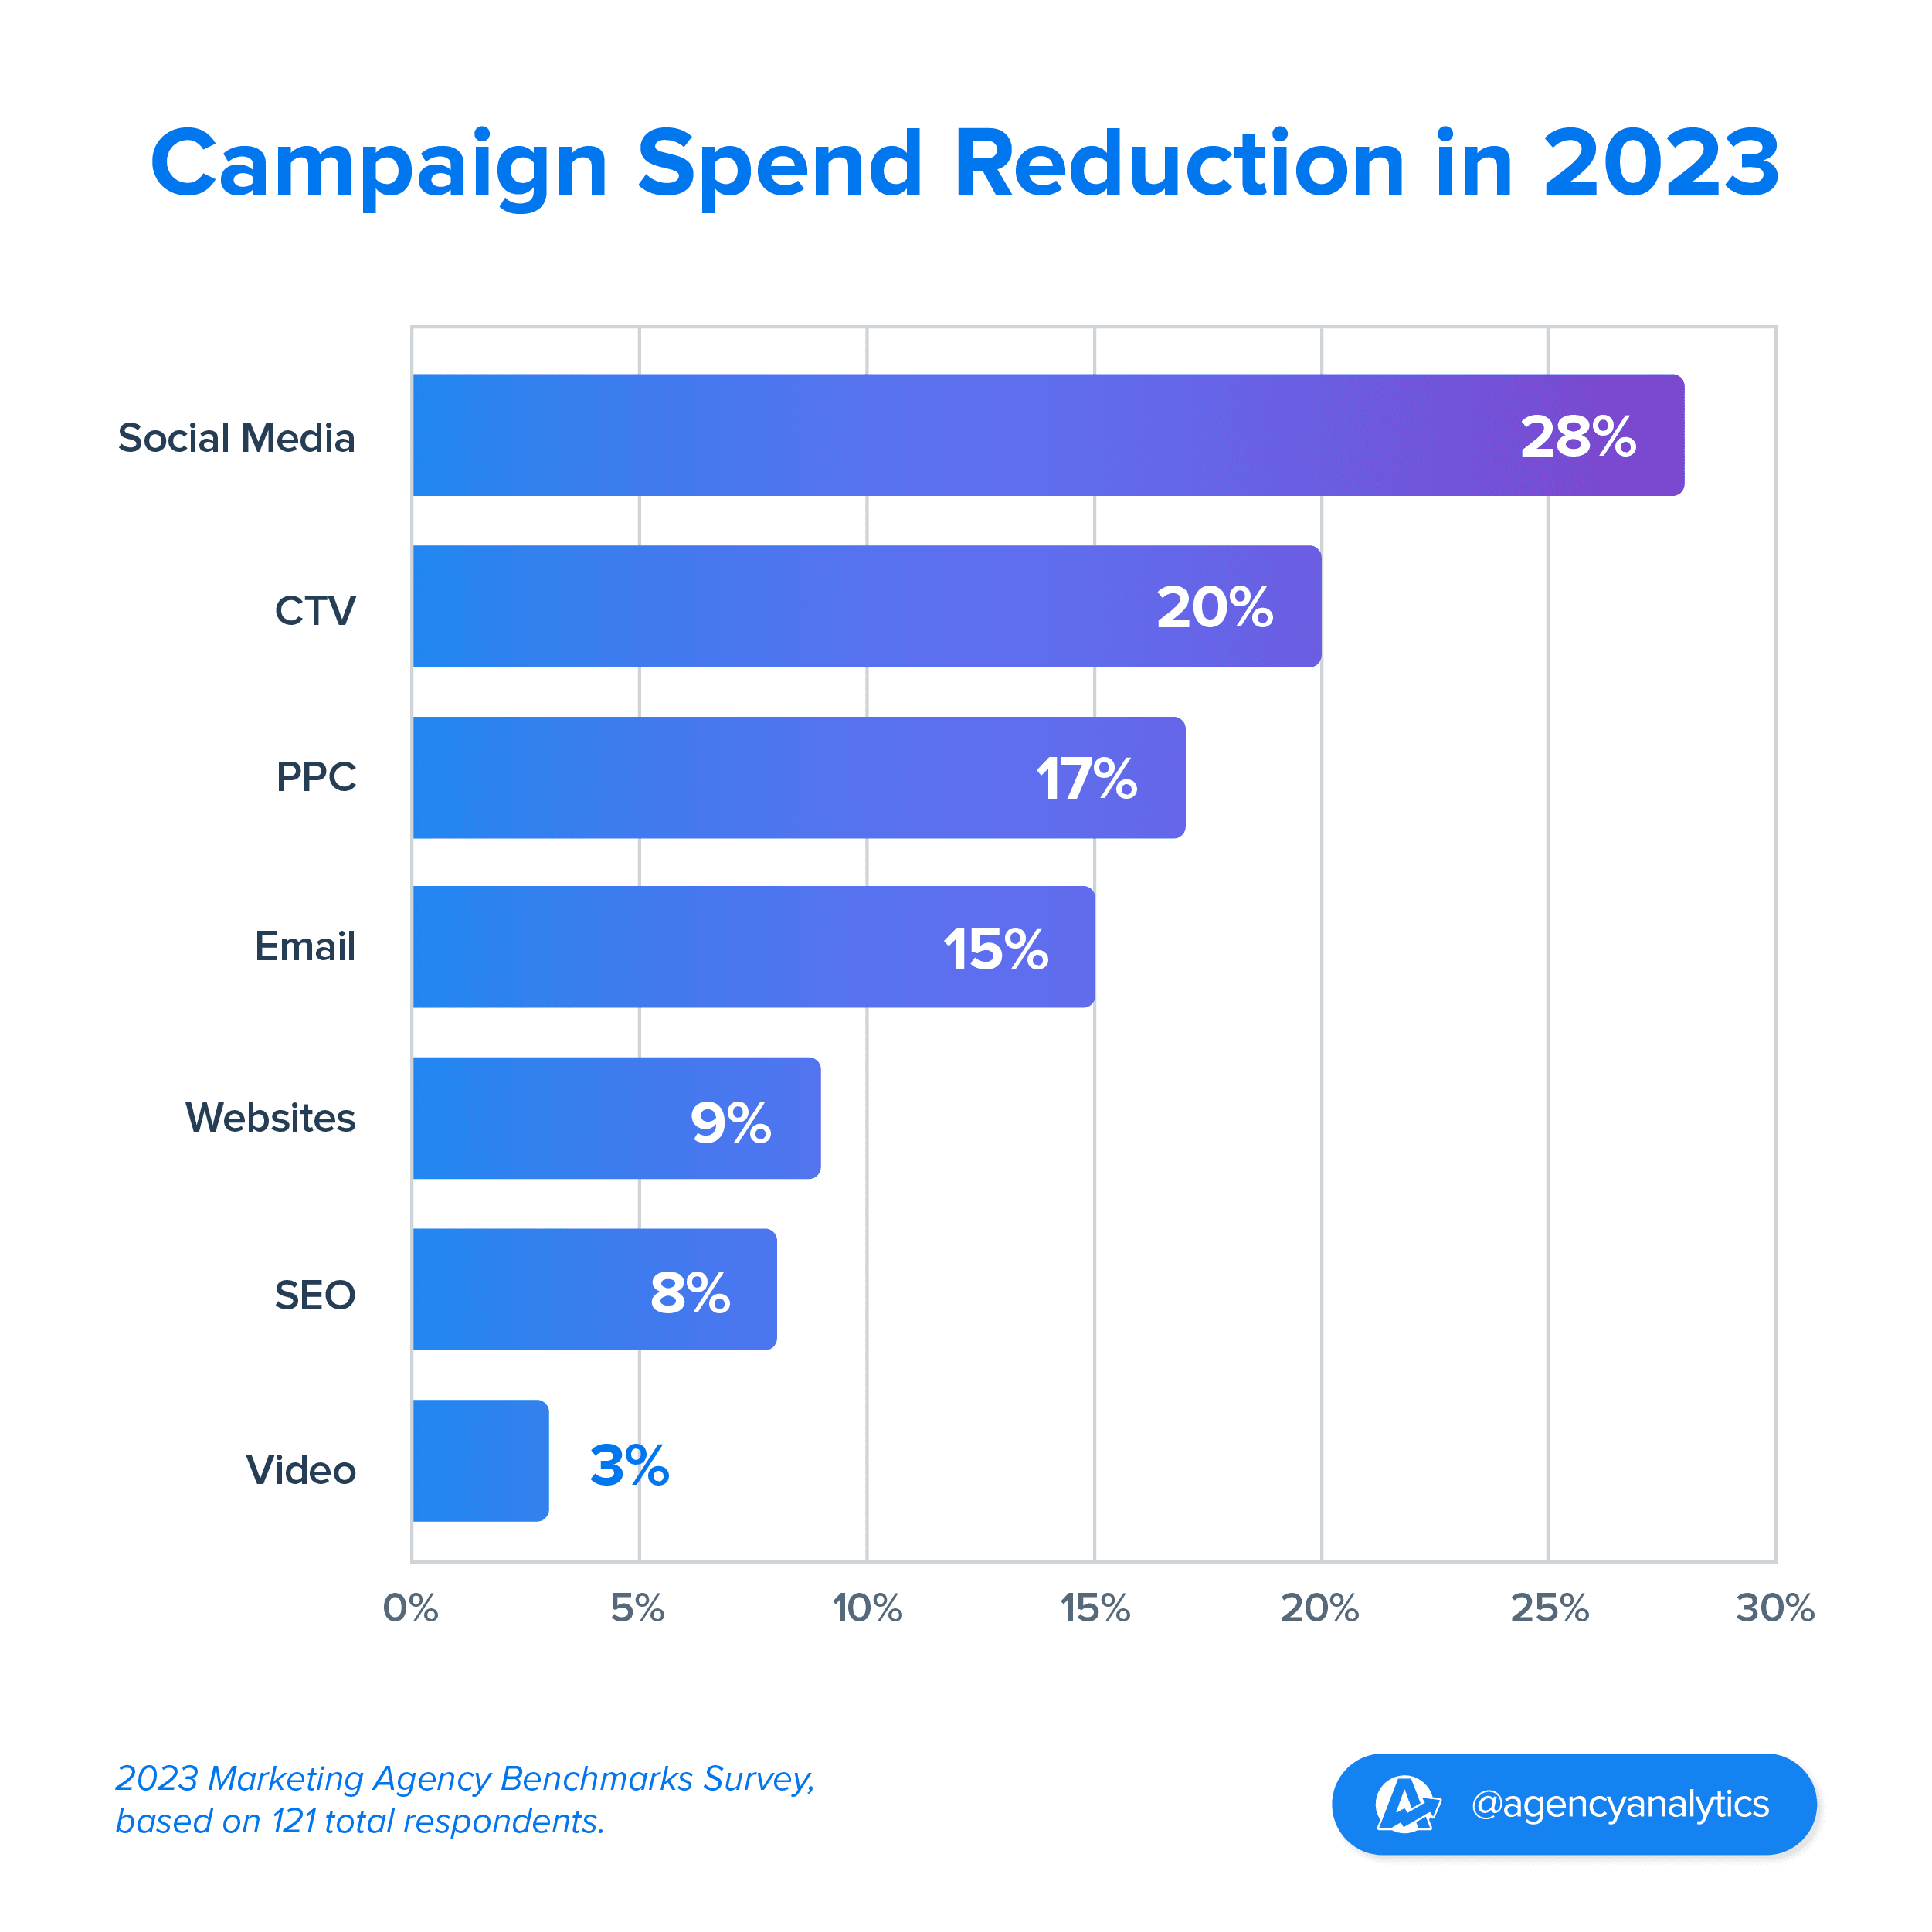 Graph showing Channel Spend Reductions Planned in 2023